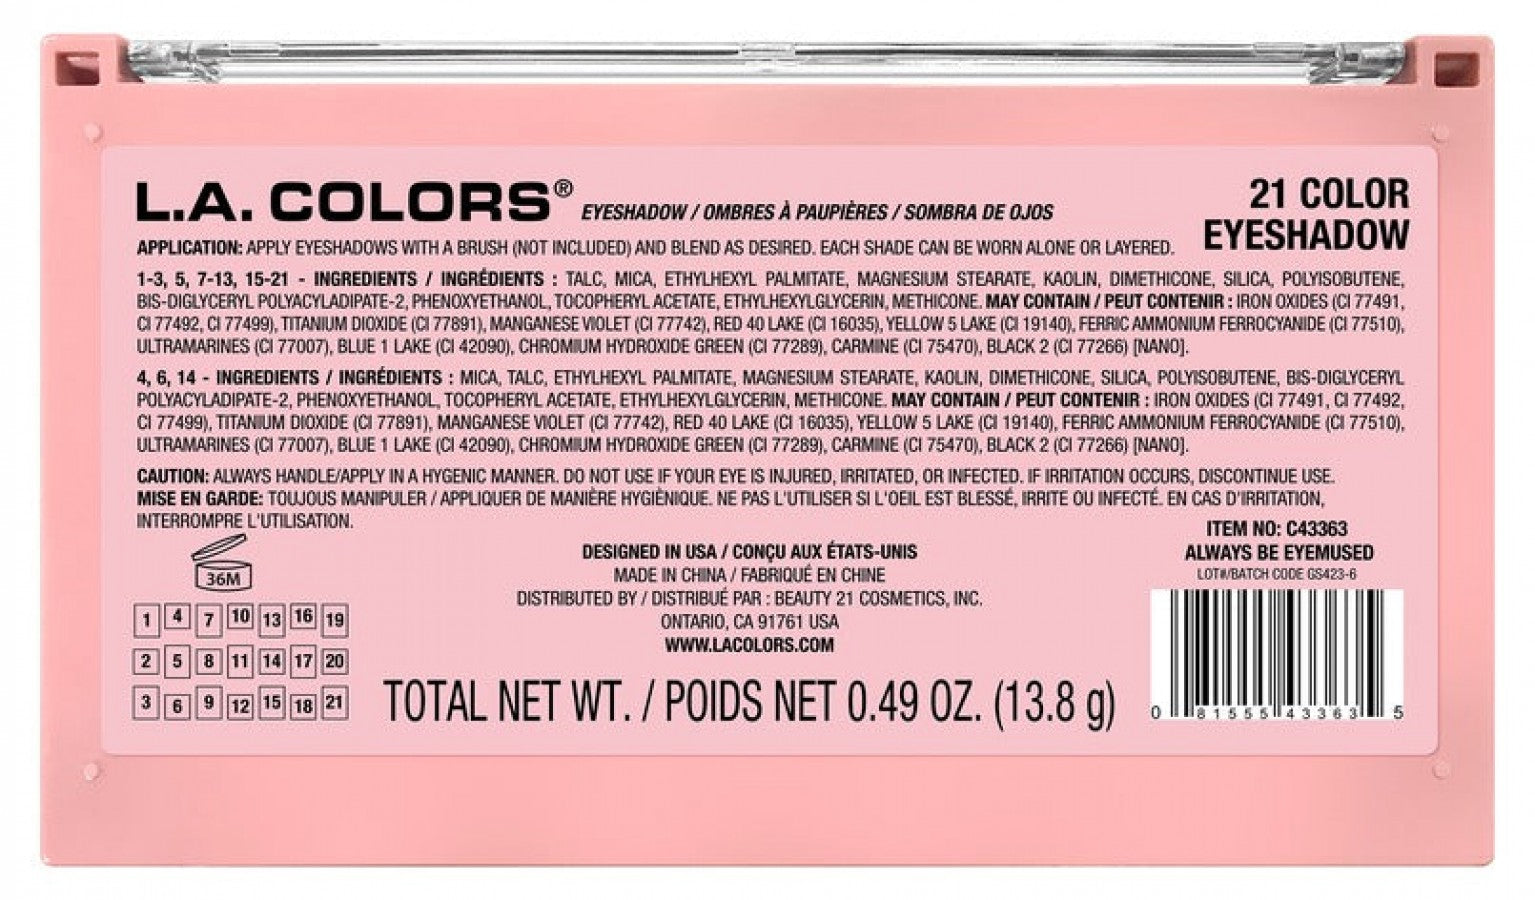 L.A Colors 21 Color Eyeshadow Always Be Eyemused